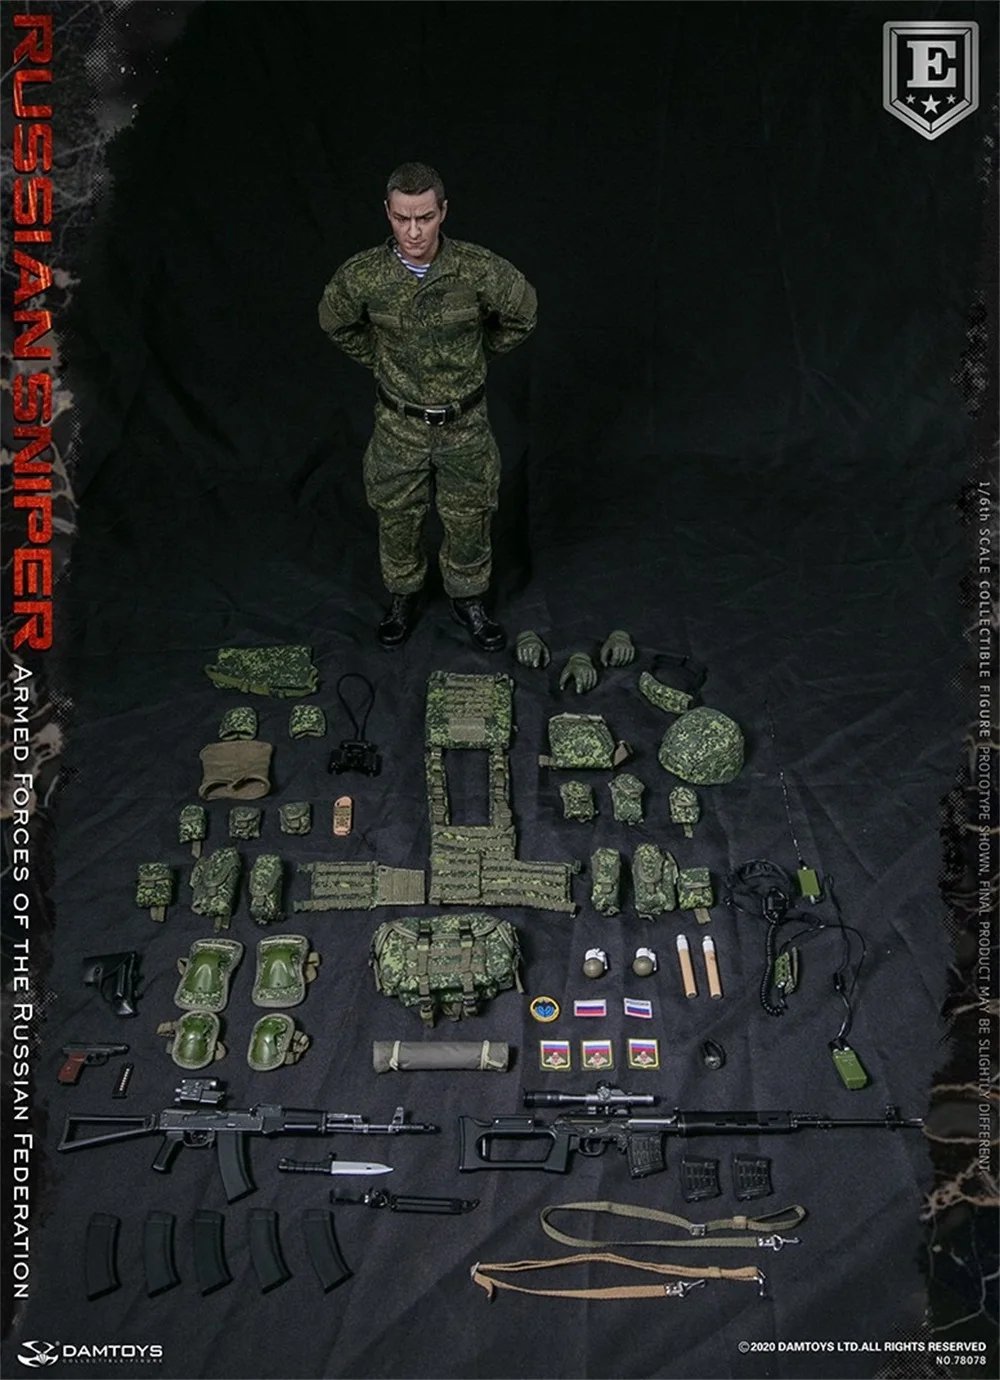 

1/6 DAMTOYS DAM 78078 Russian Federal Armed Forces Sniper Elite Version Full Set 12" Action Soldier Figures Model In Stock